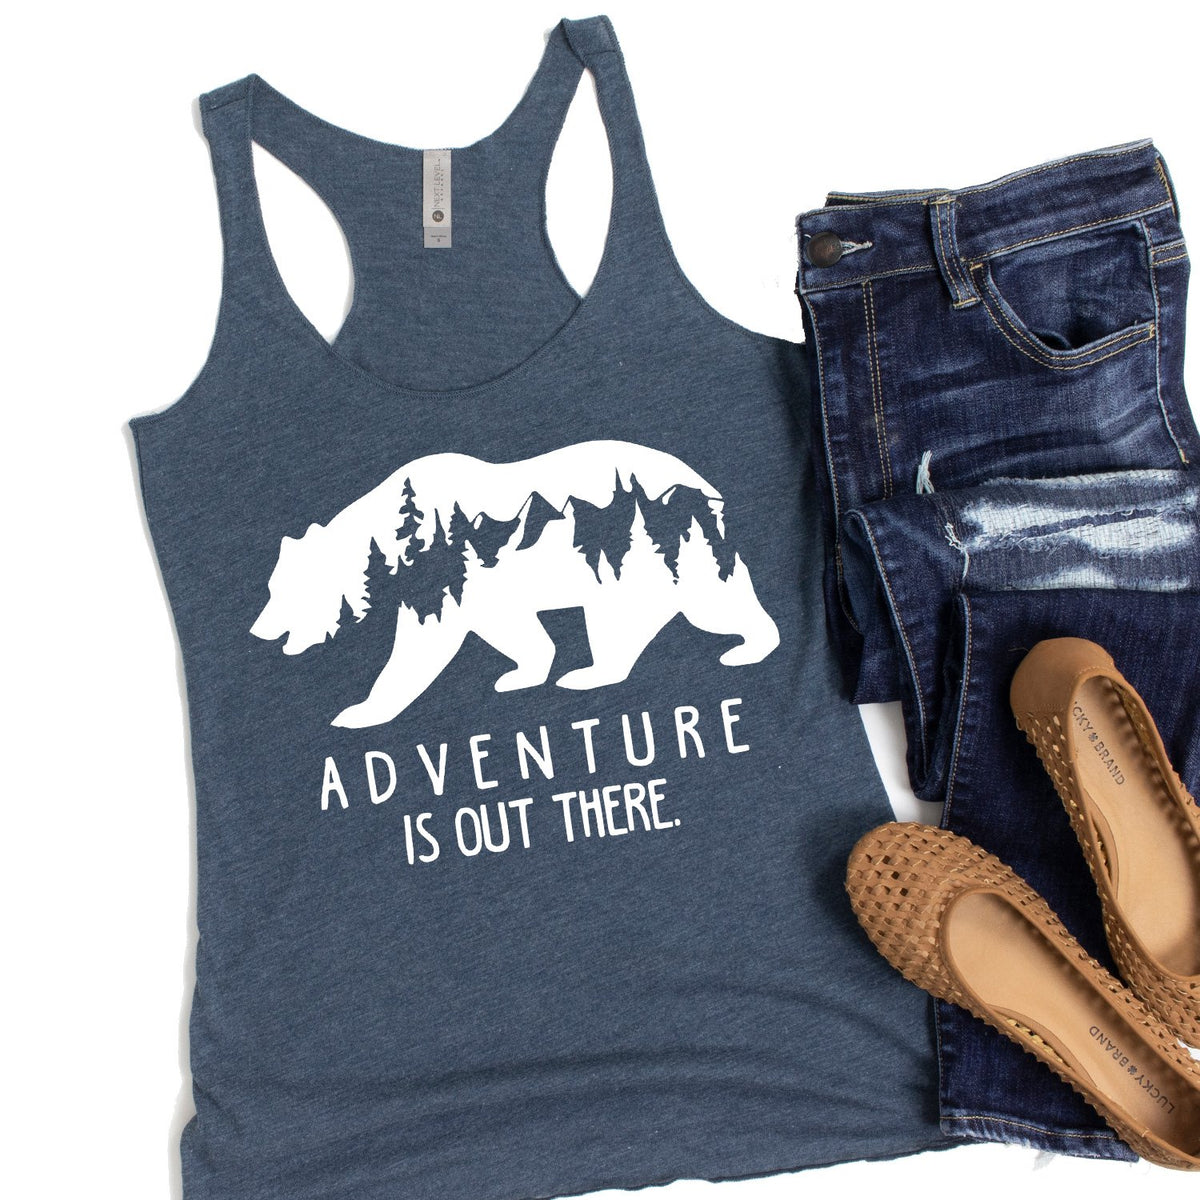 Adventure is Out There - Tank Top Racerback